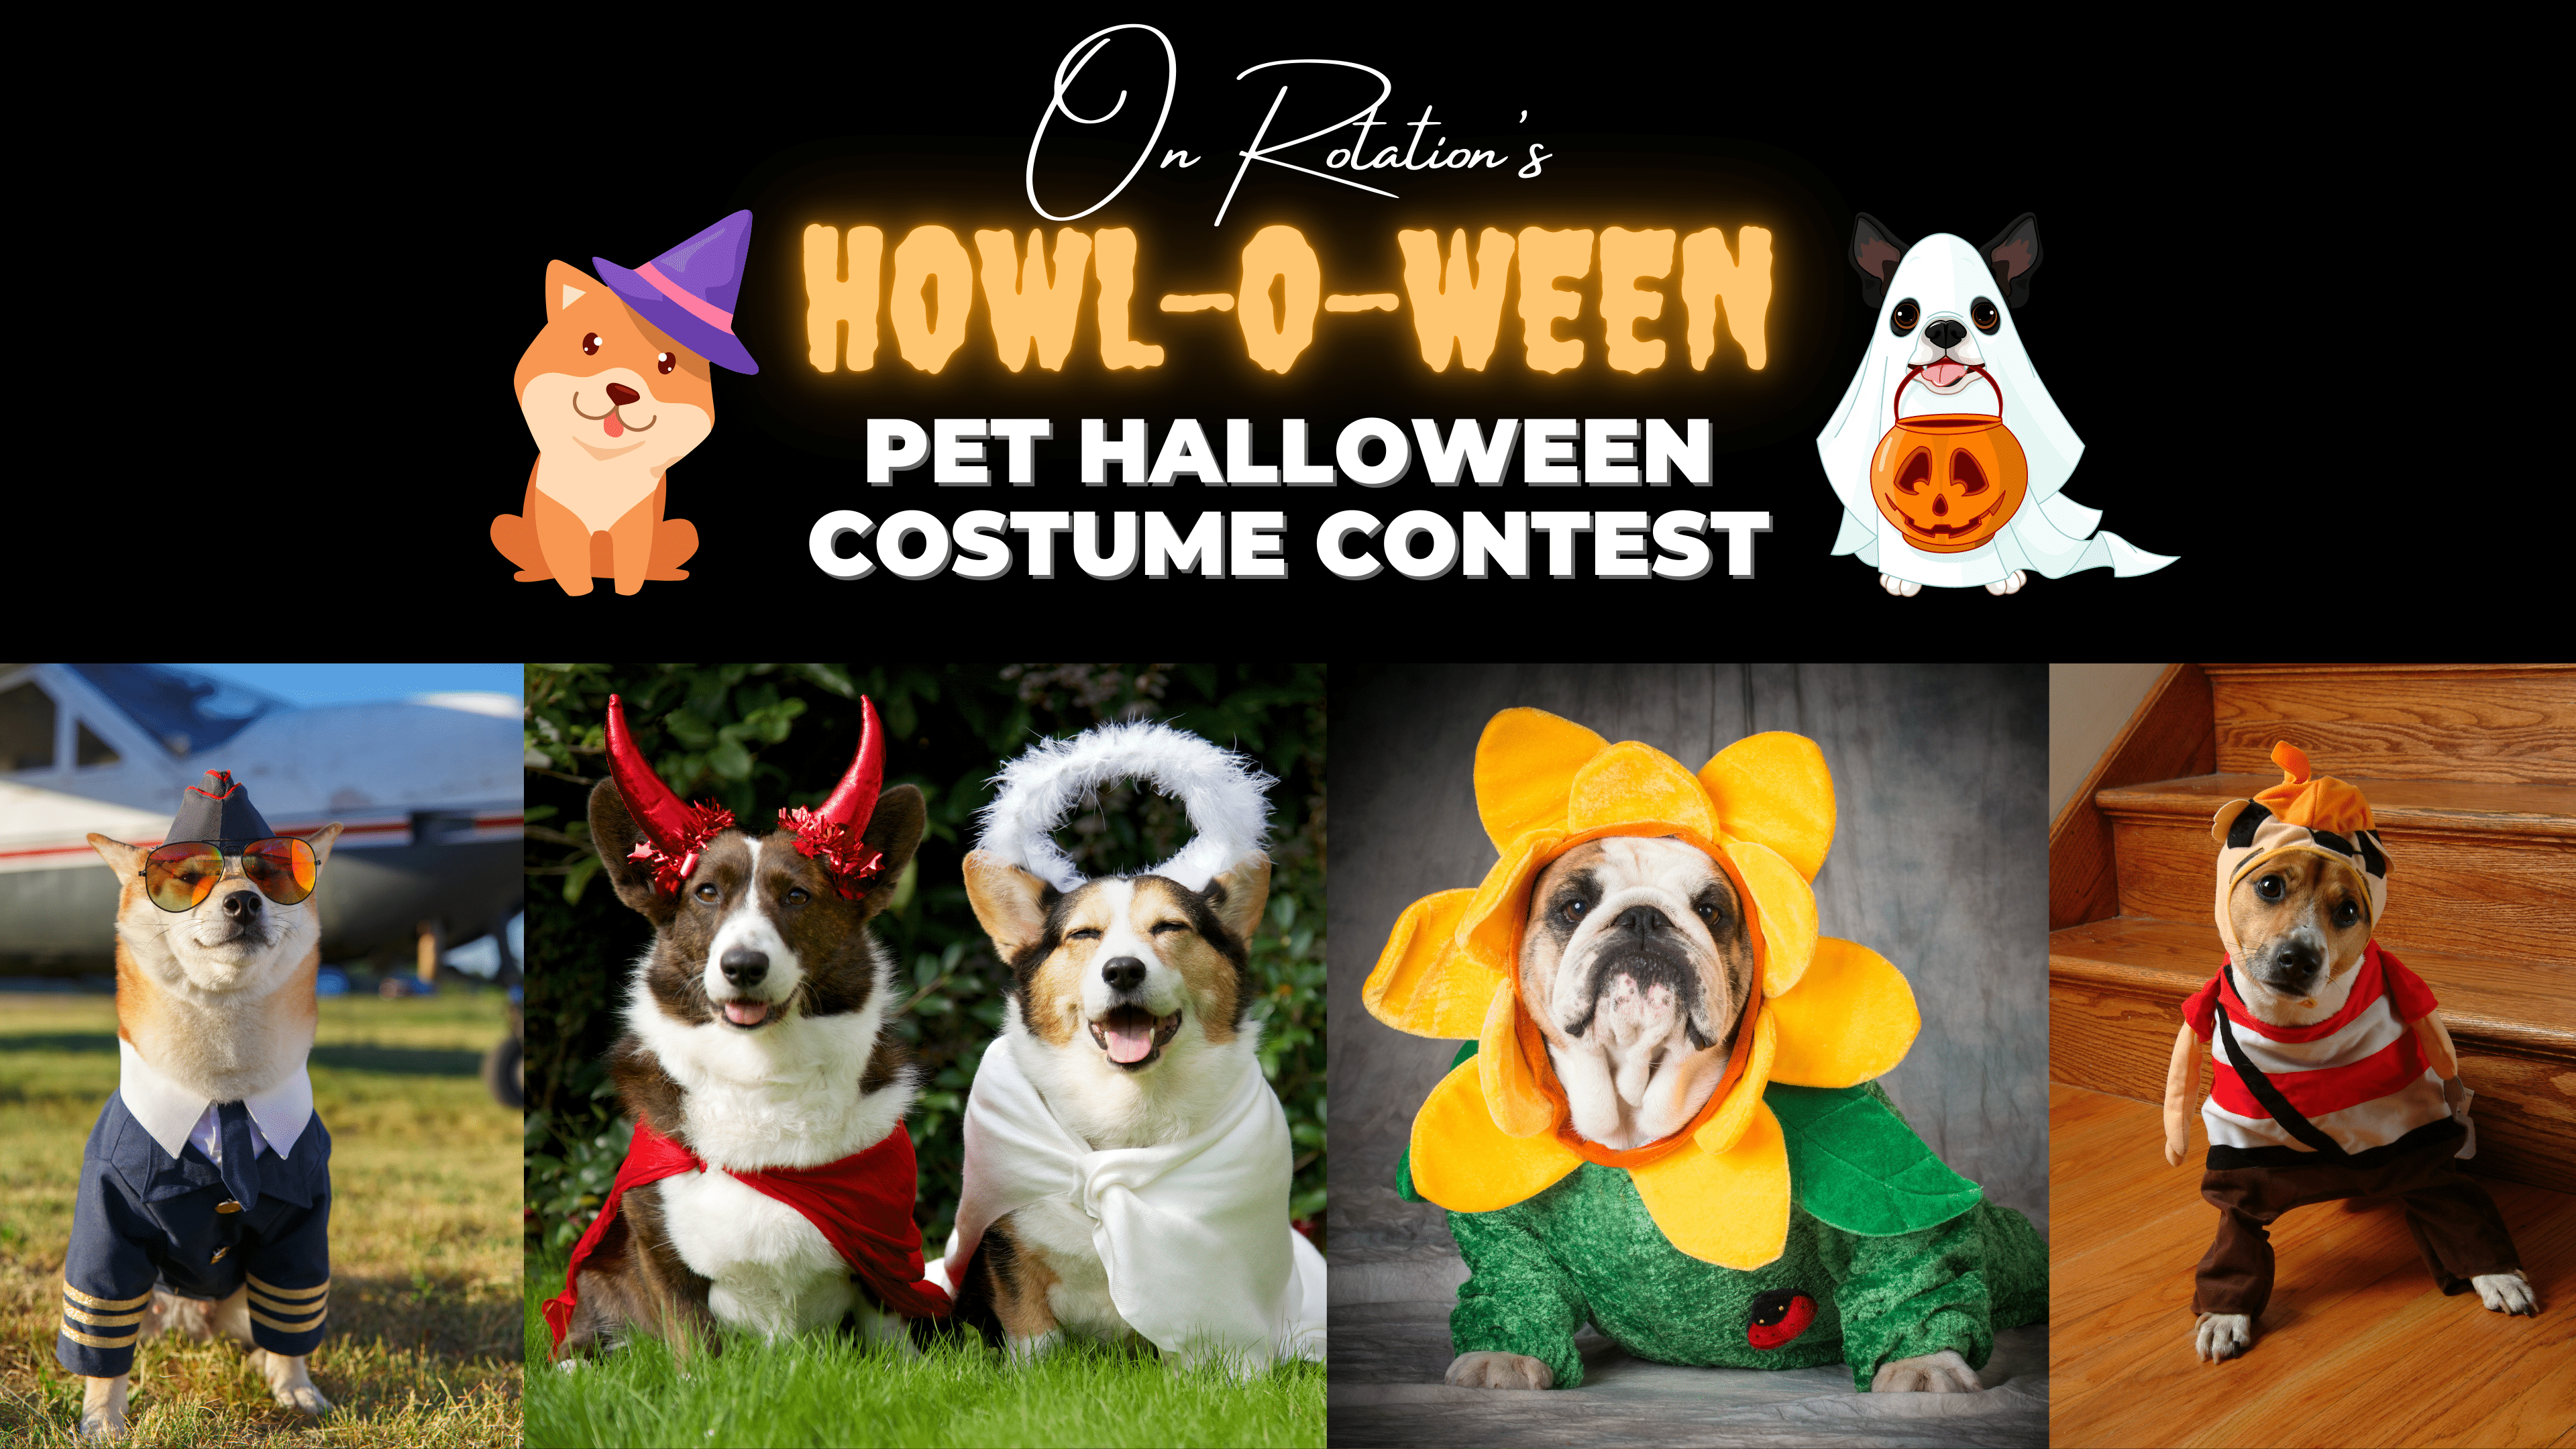 Howl-O-Ween Halloween Pet Costume Contest at On Rotation